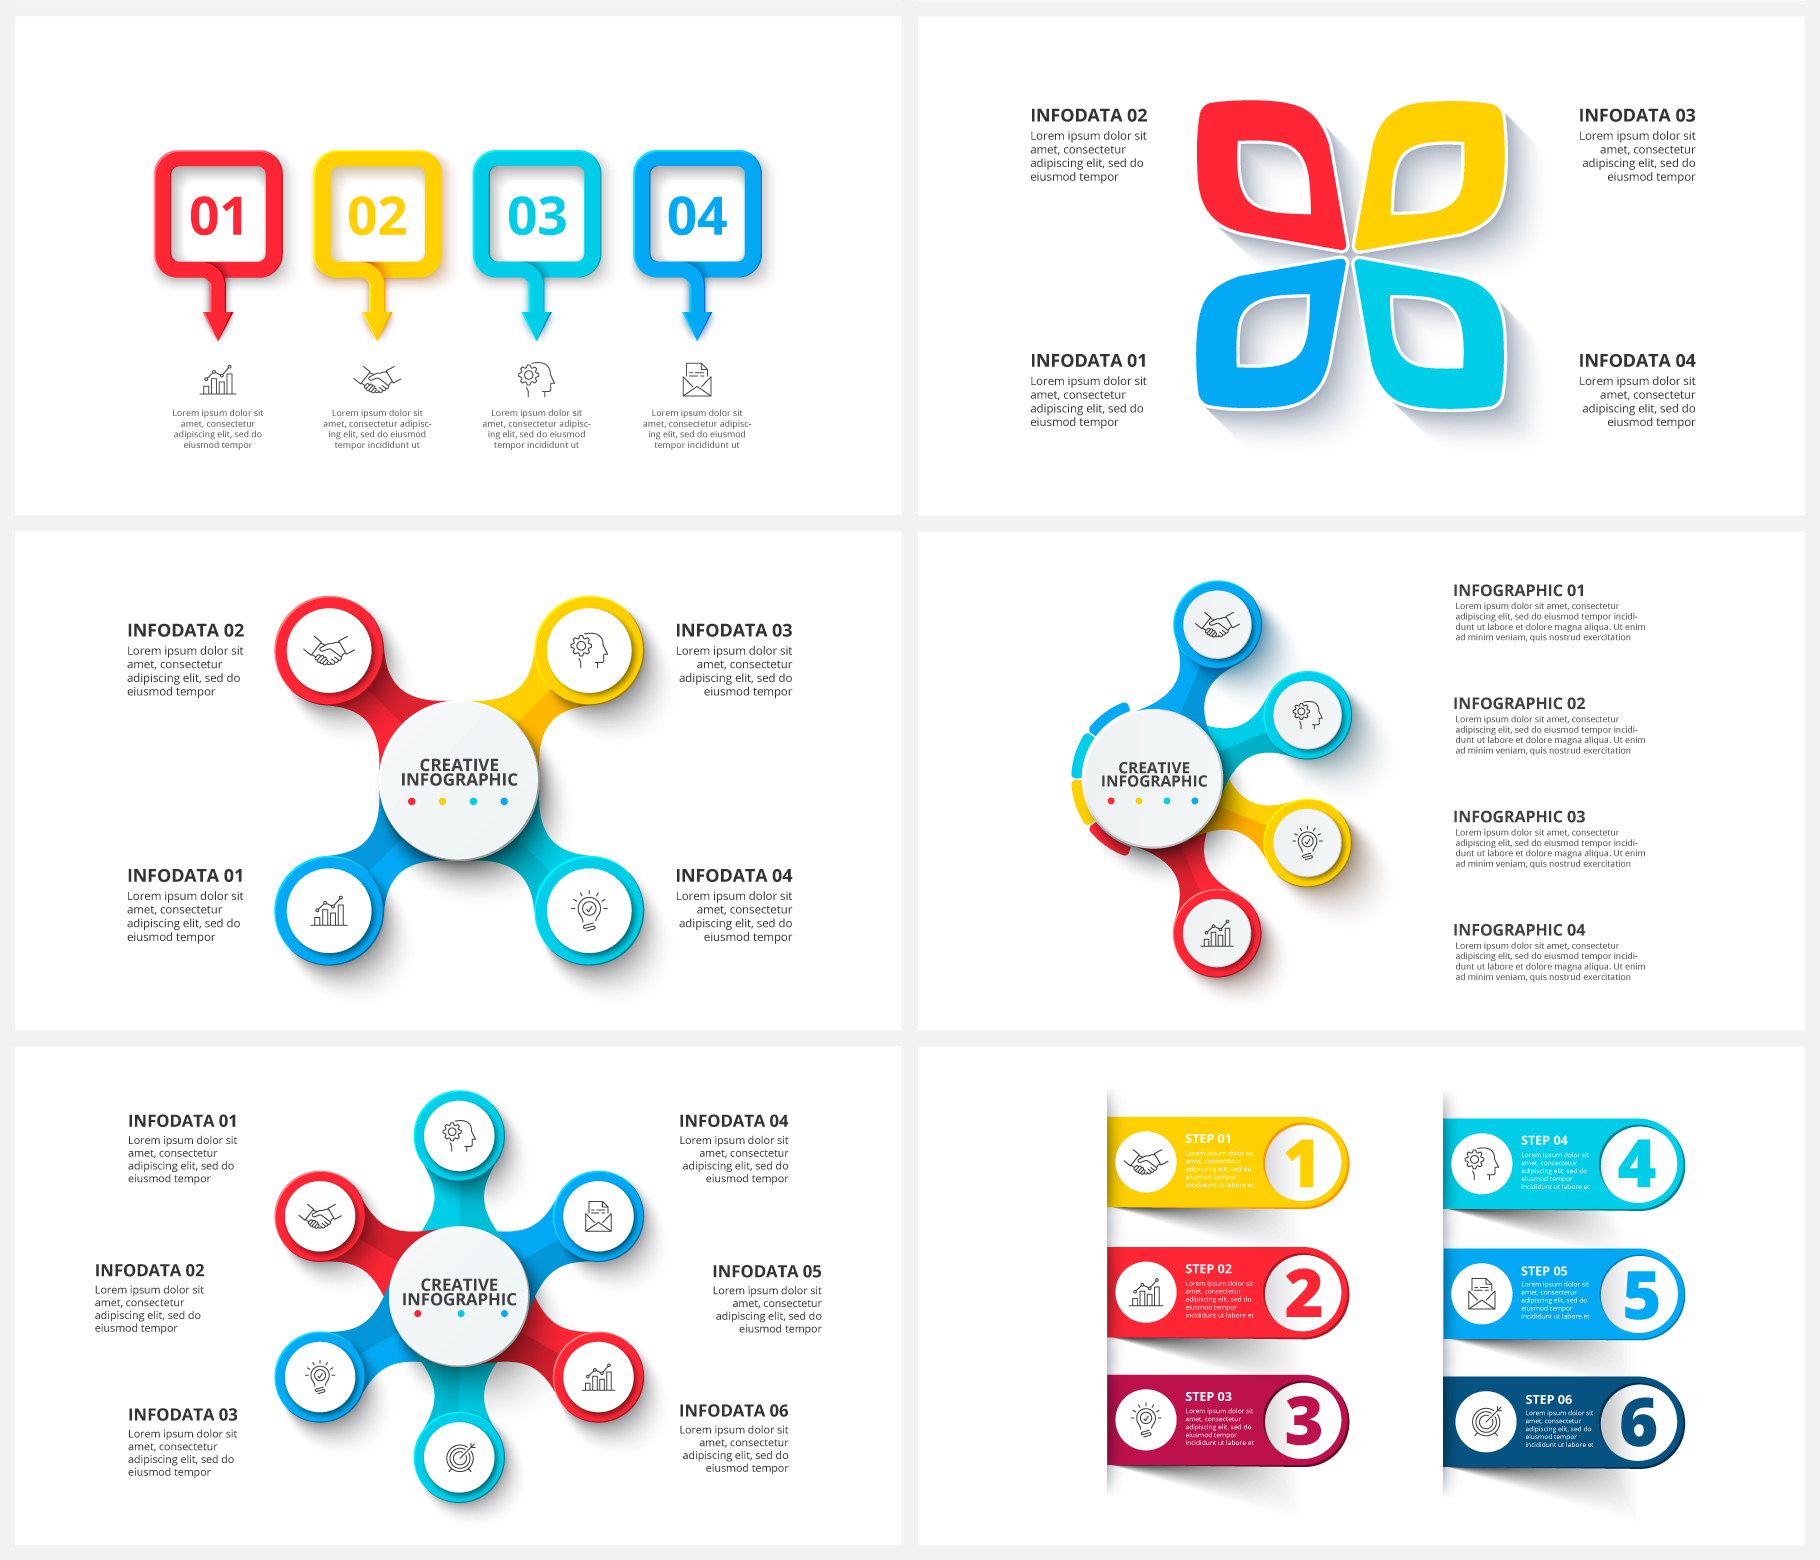 animated infographic example 3 - Simple Infographic Maker Tool by Easelly